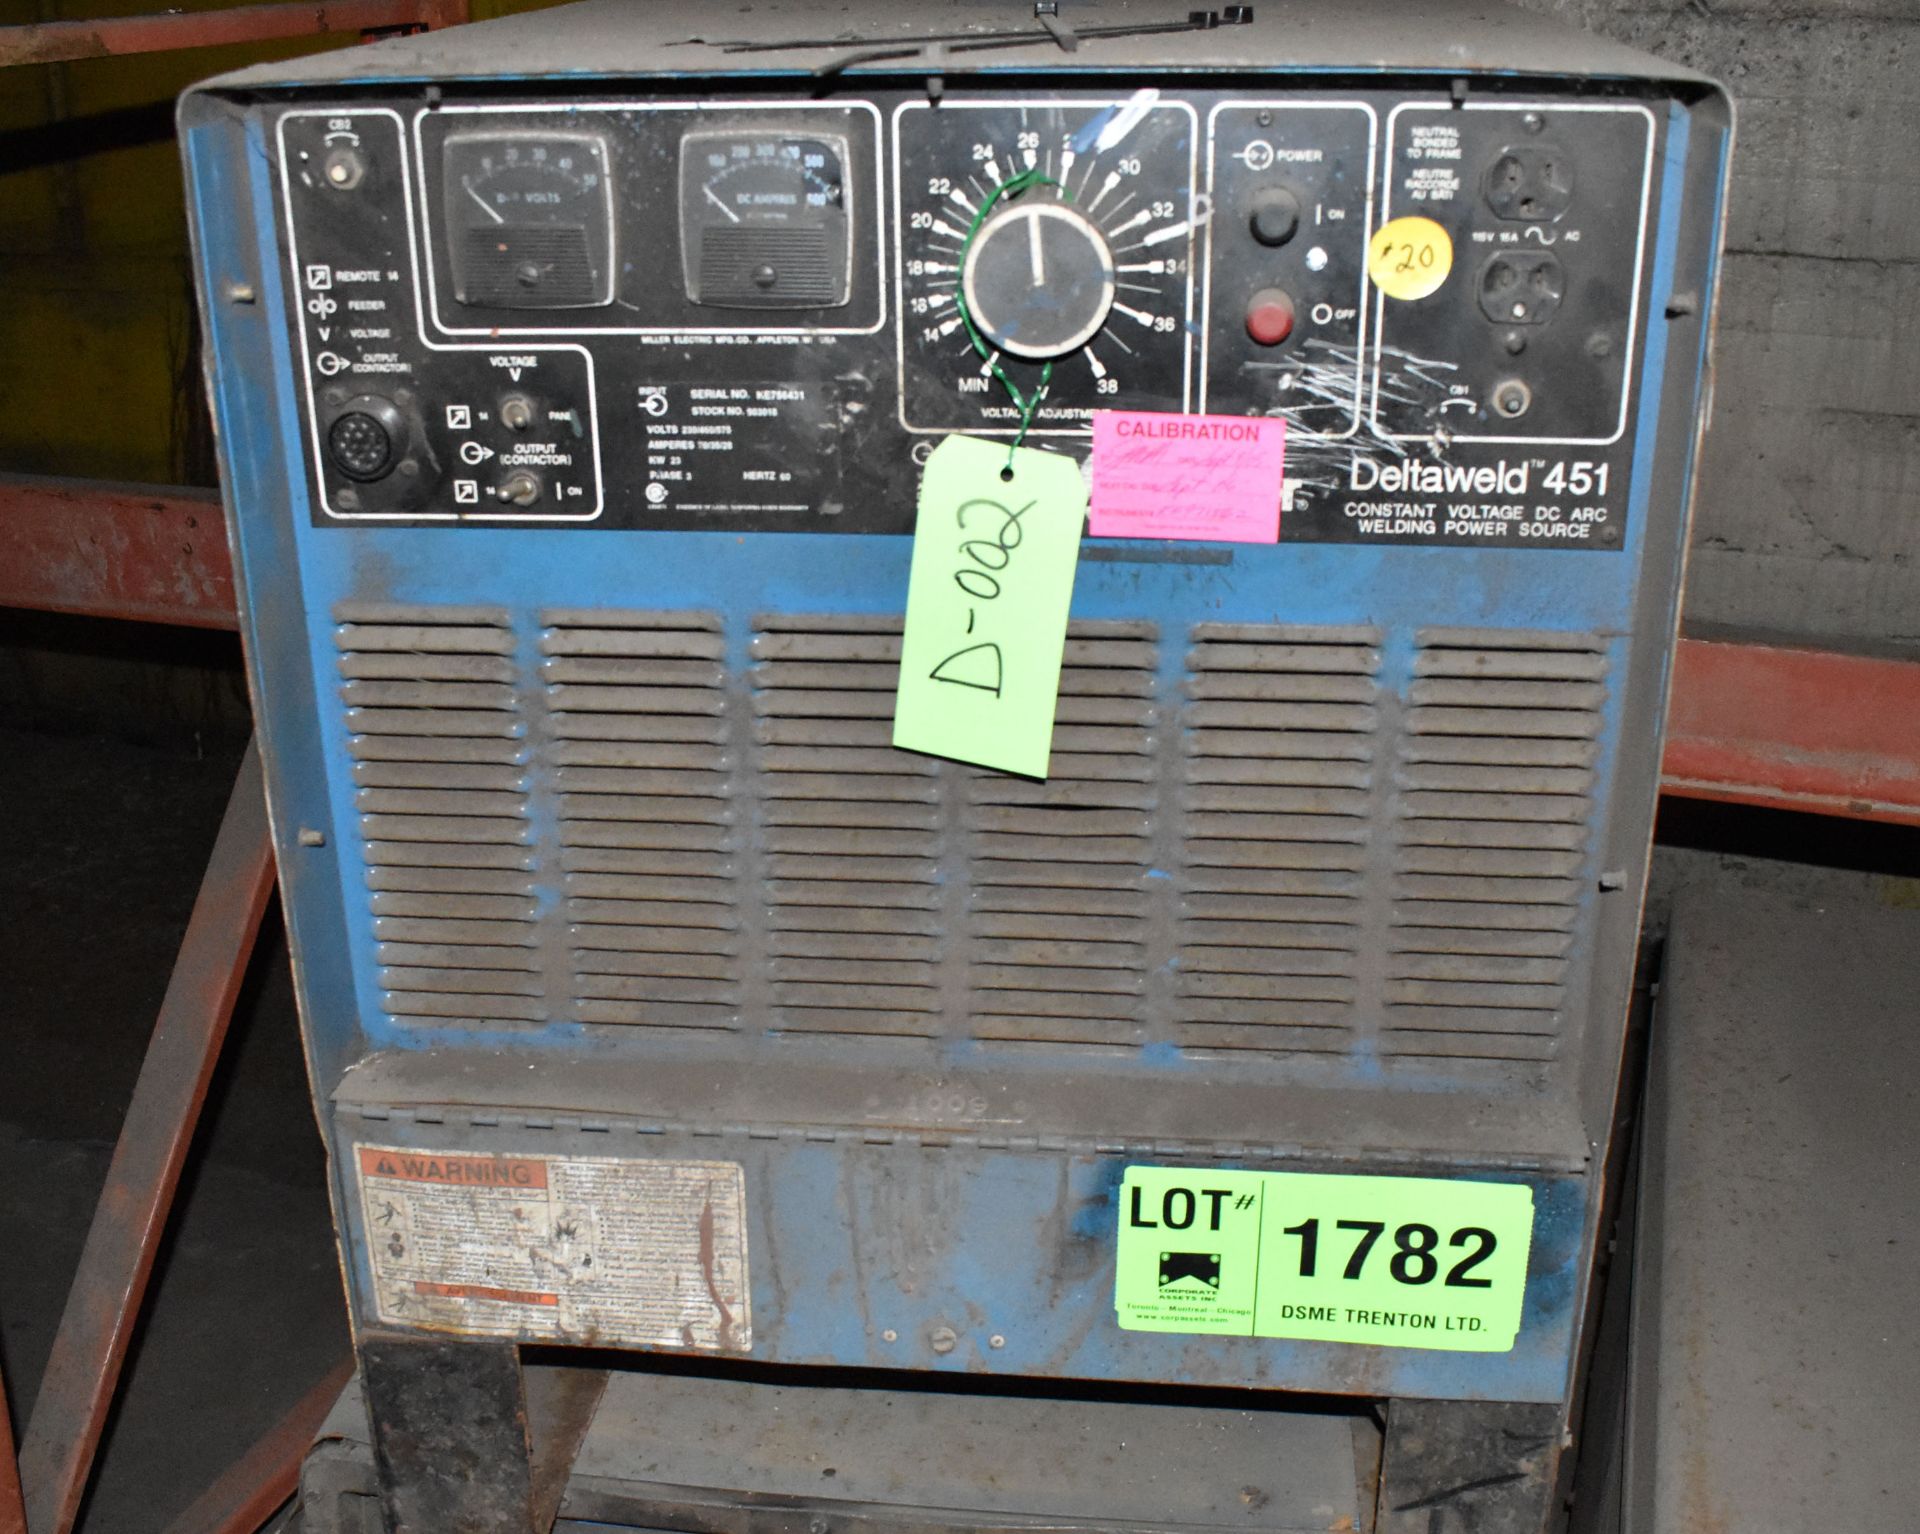 MILLER DELTAWELD 451 WELDING POWER SOURCE [RIGGING FEE FOR LOT# 1782 - $40 USD +PLUS TAXES]